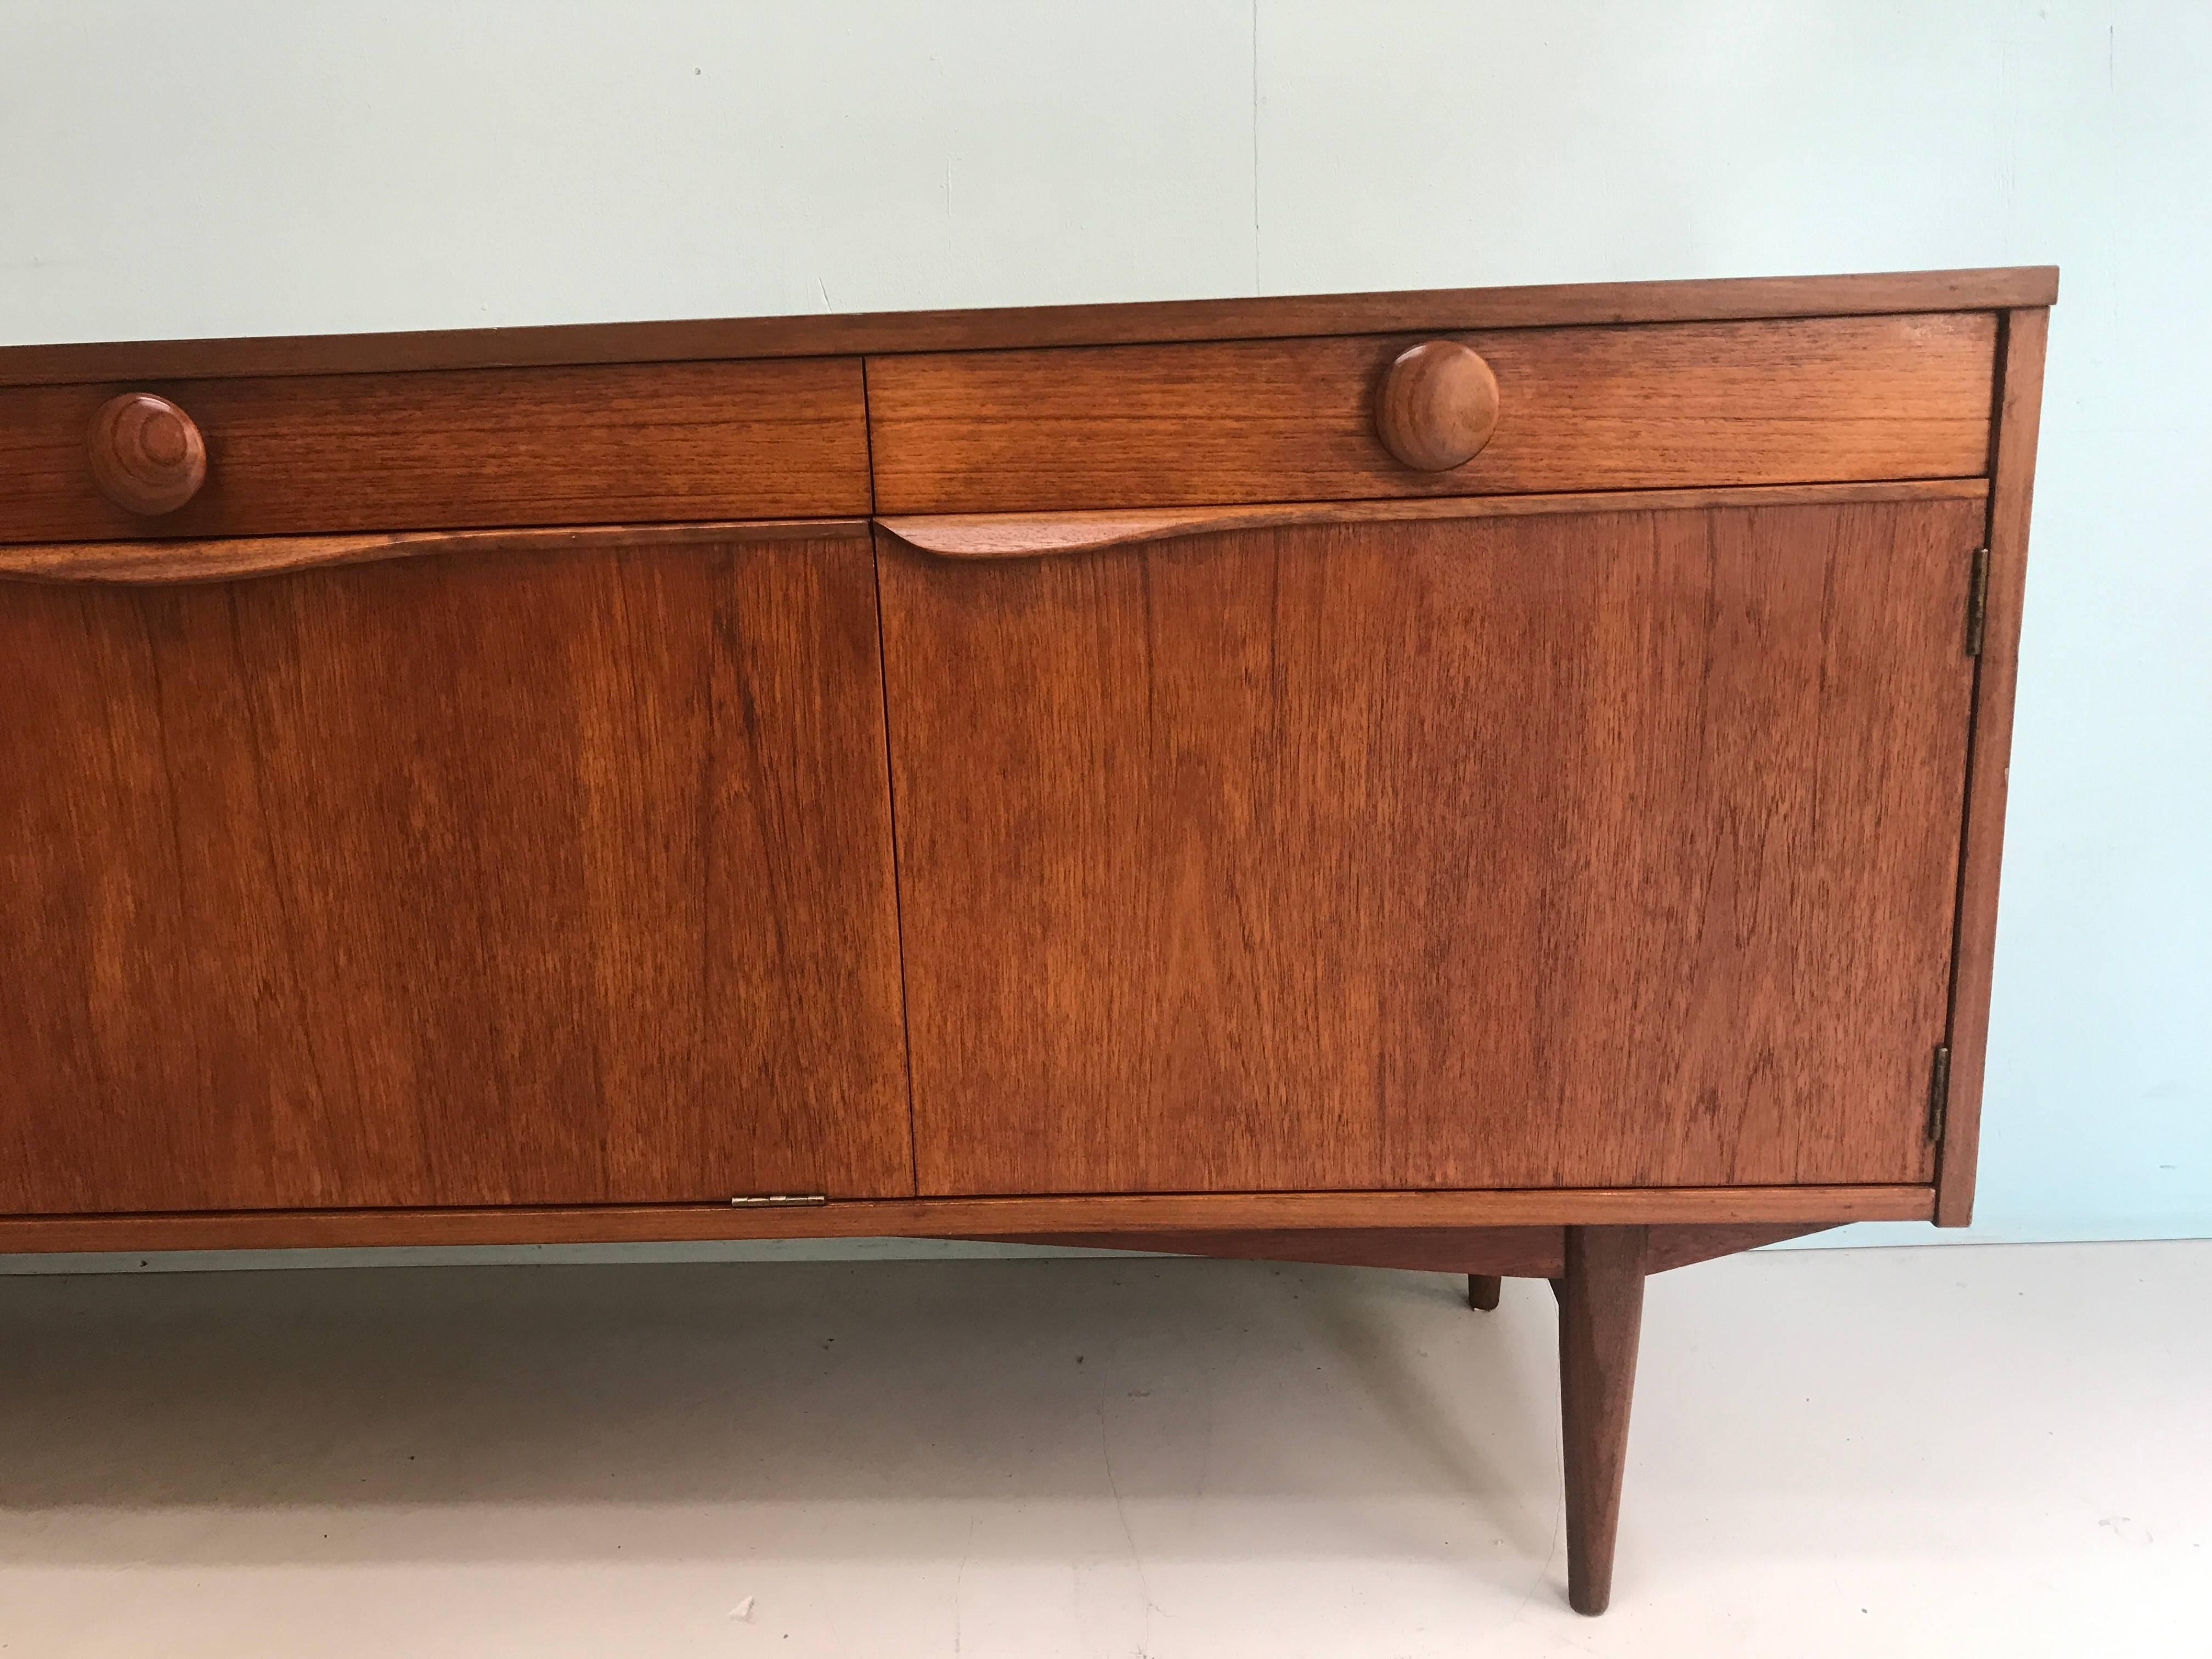 Vintage sideboard made of teak from the 1960s, England produced by Elliot in England.